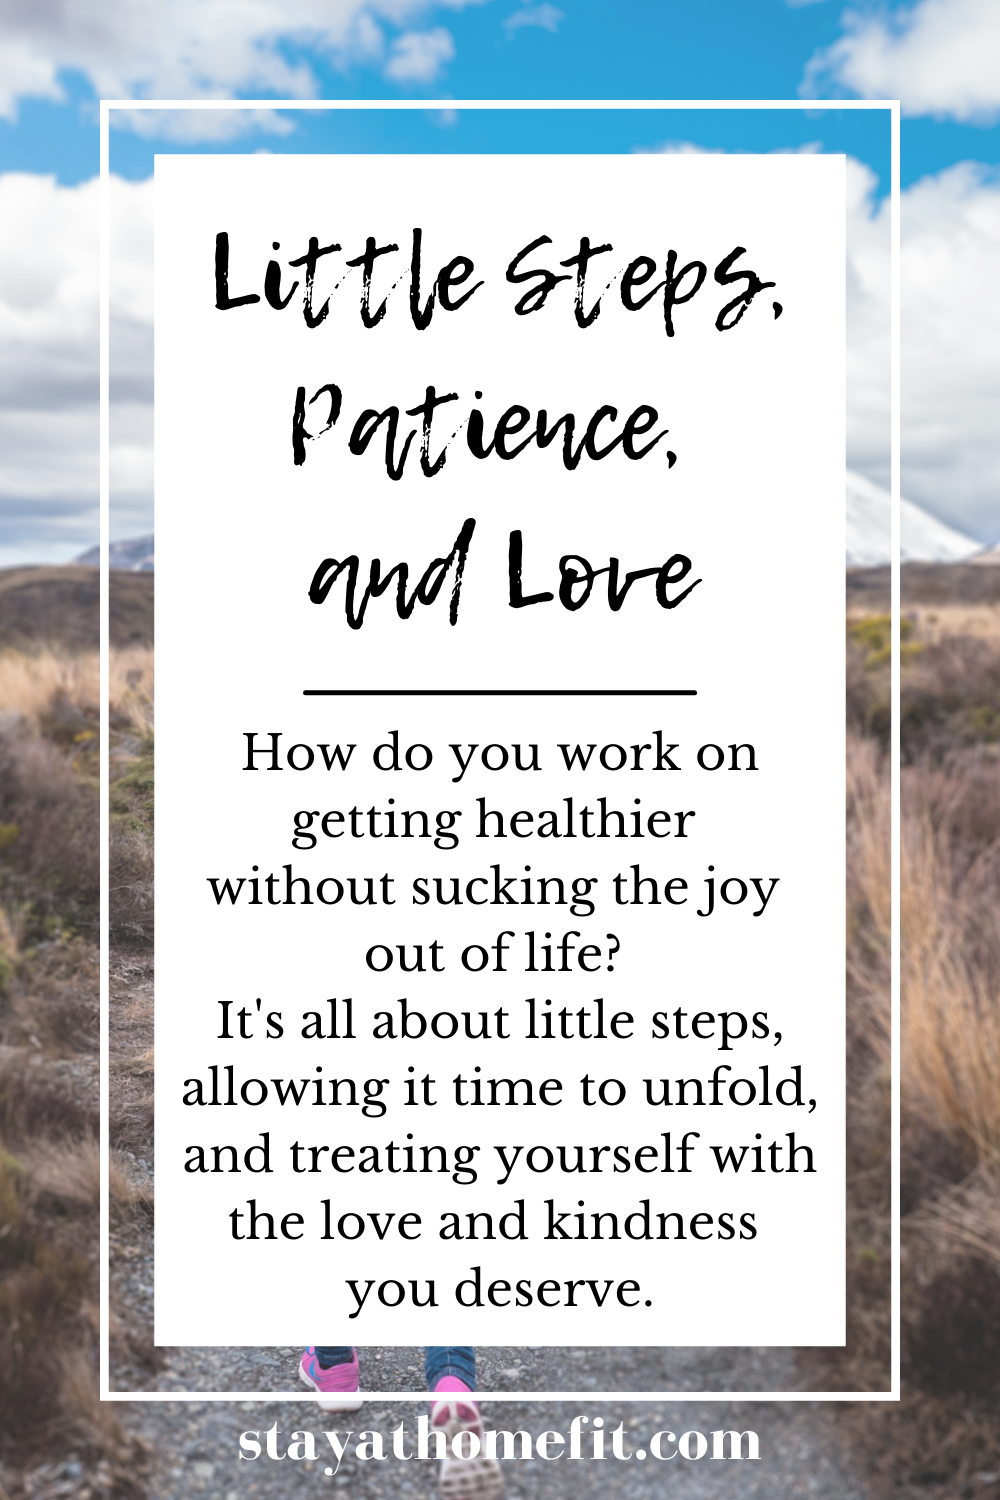 Little Steps, Patience, and Love